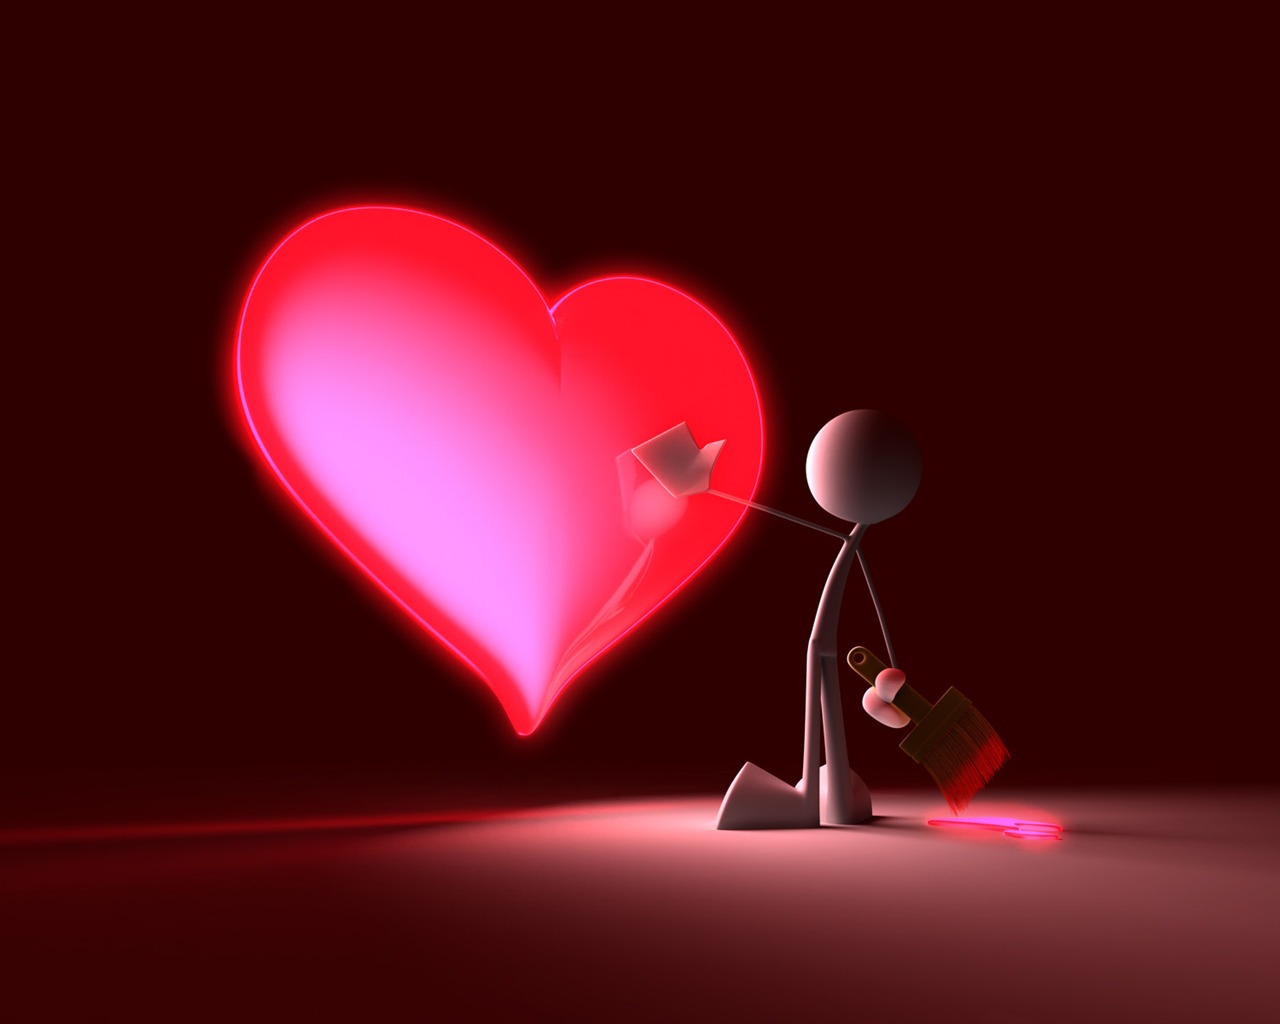 Valentine's Day Theme Wallpapers (3) #27 - 1280x1024